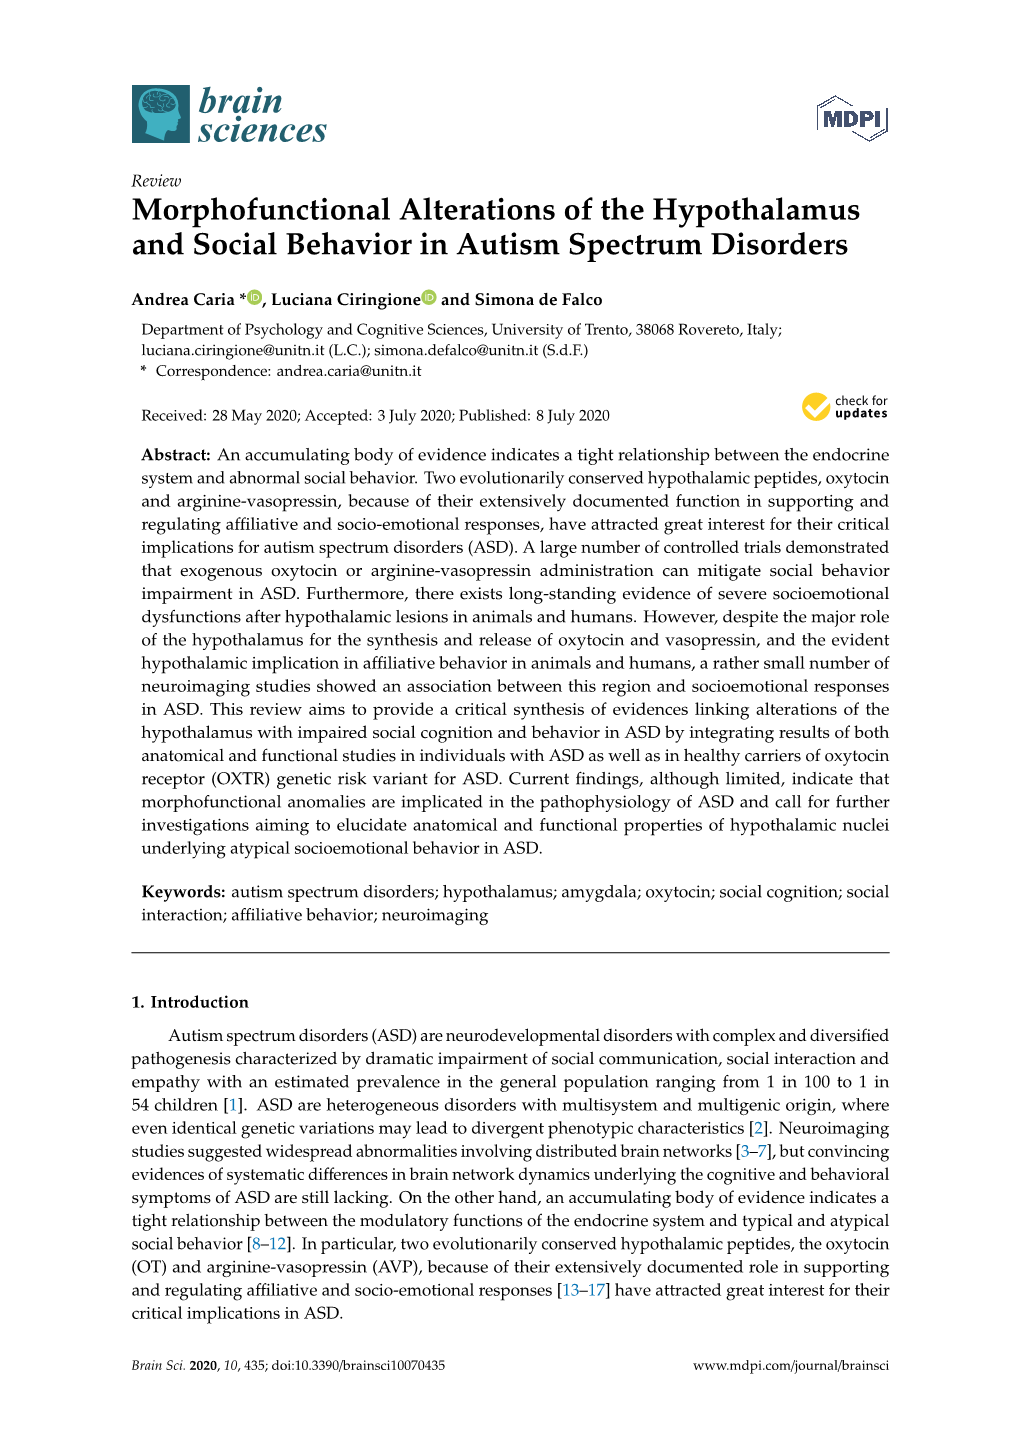 Morphofunctional Alterations of the Hypothalamus and Social Behavior in Autism Spectrum Disorders